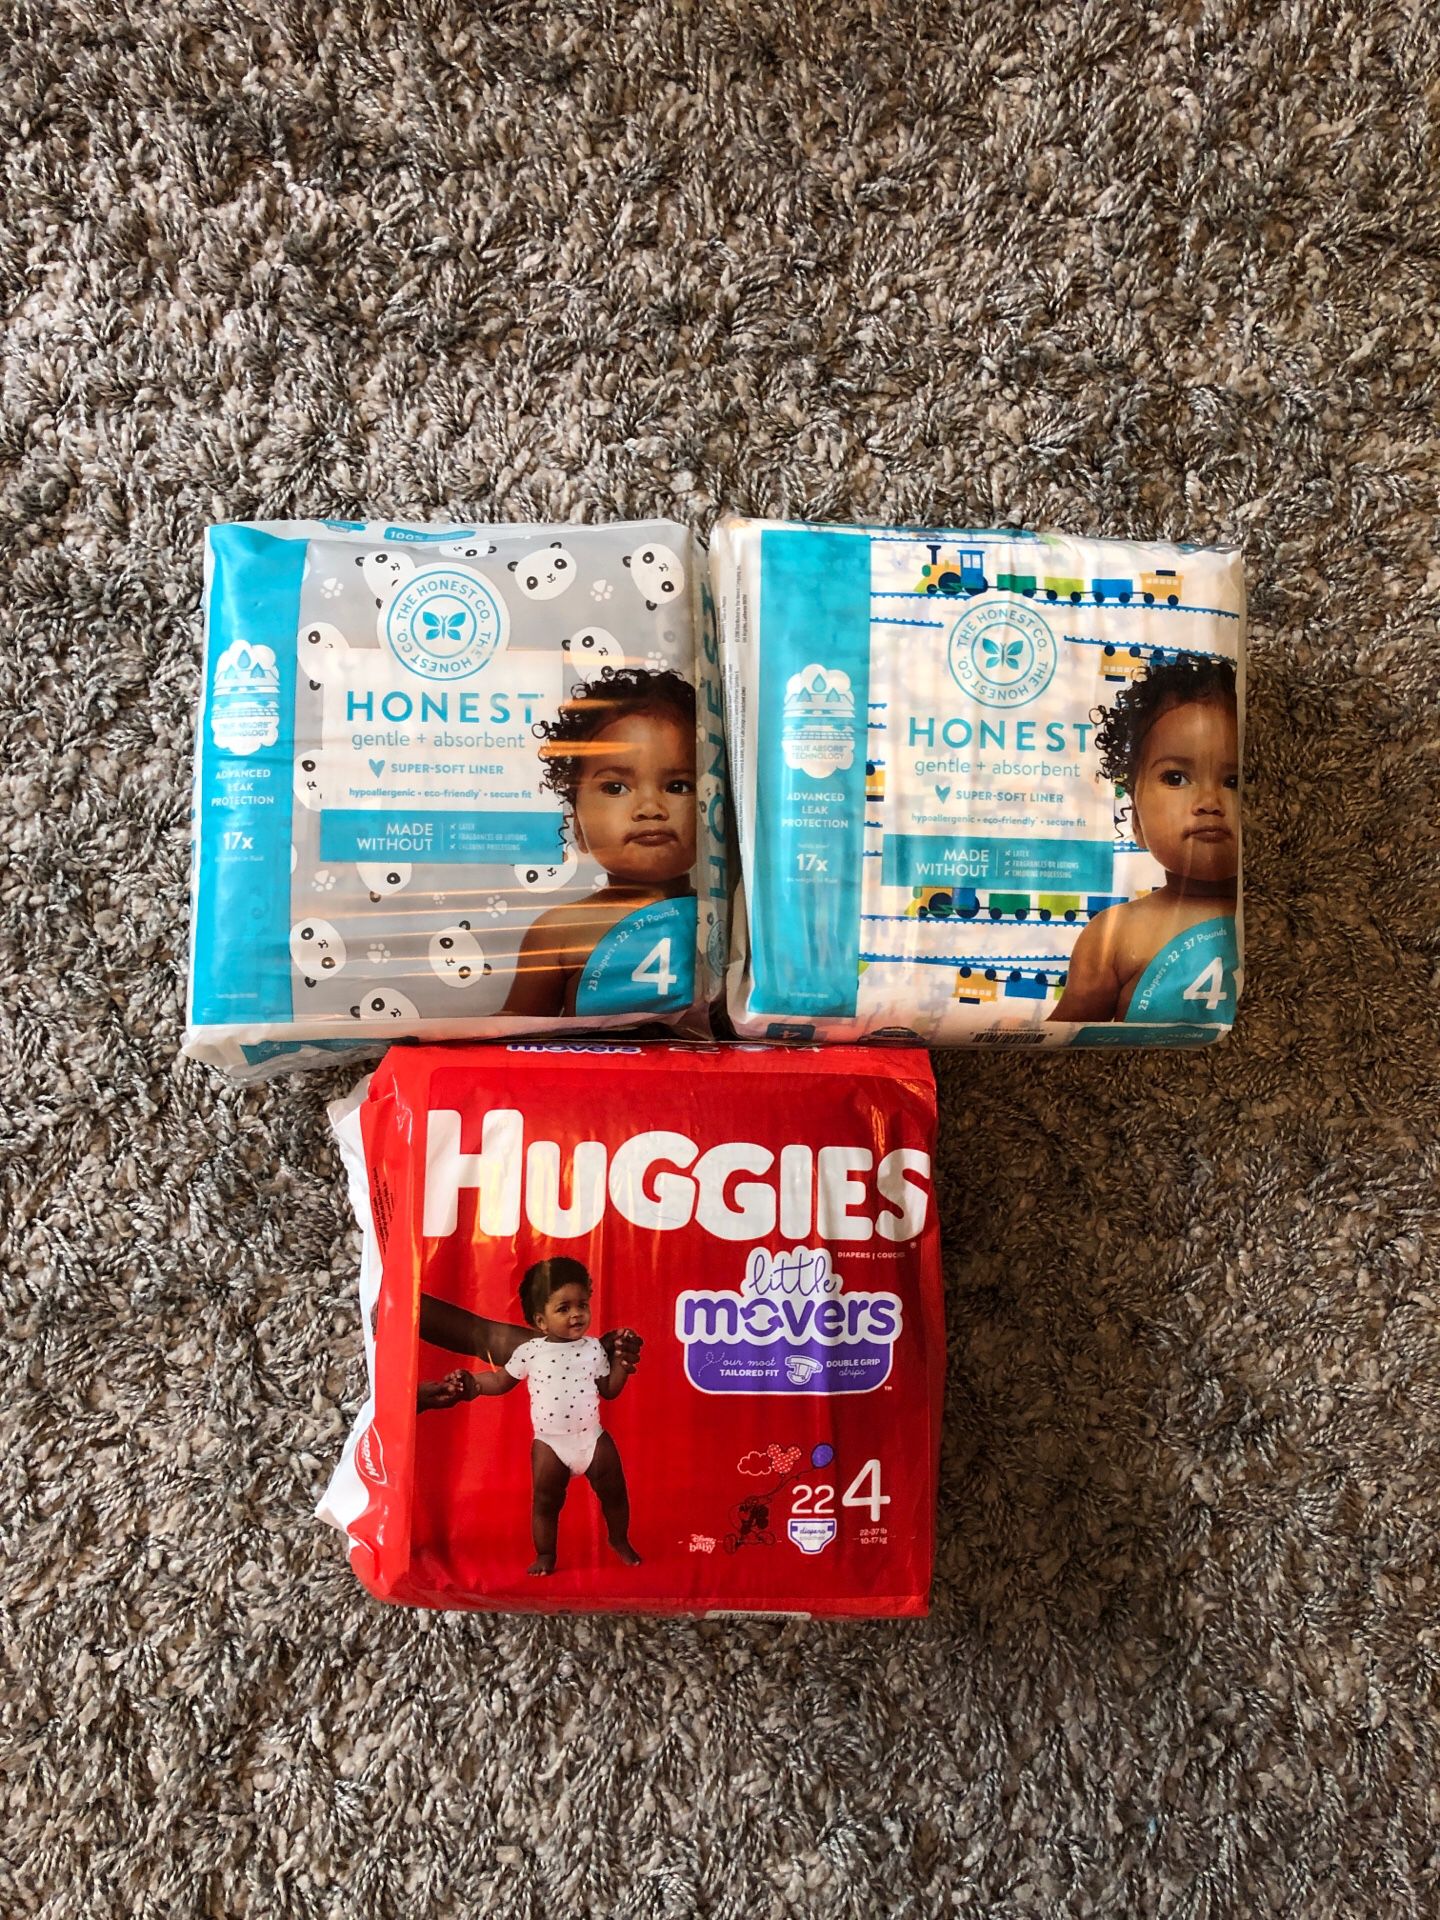 Honest and huggies diapers size 4